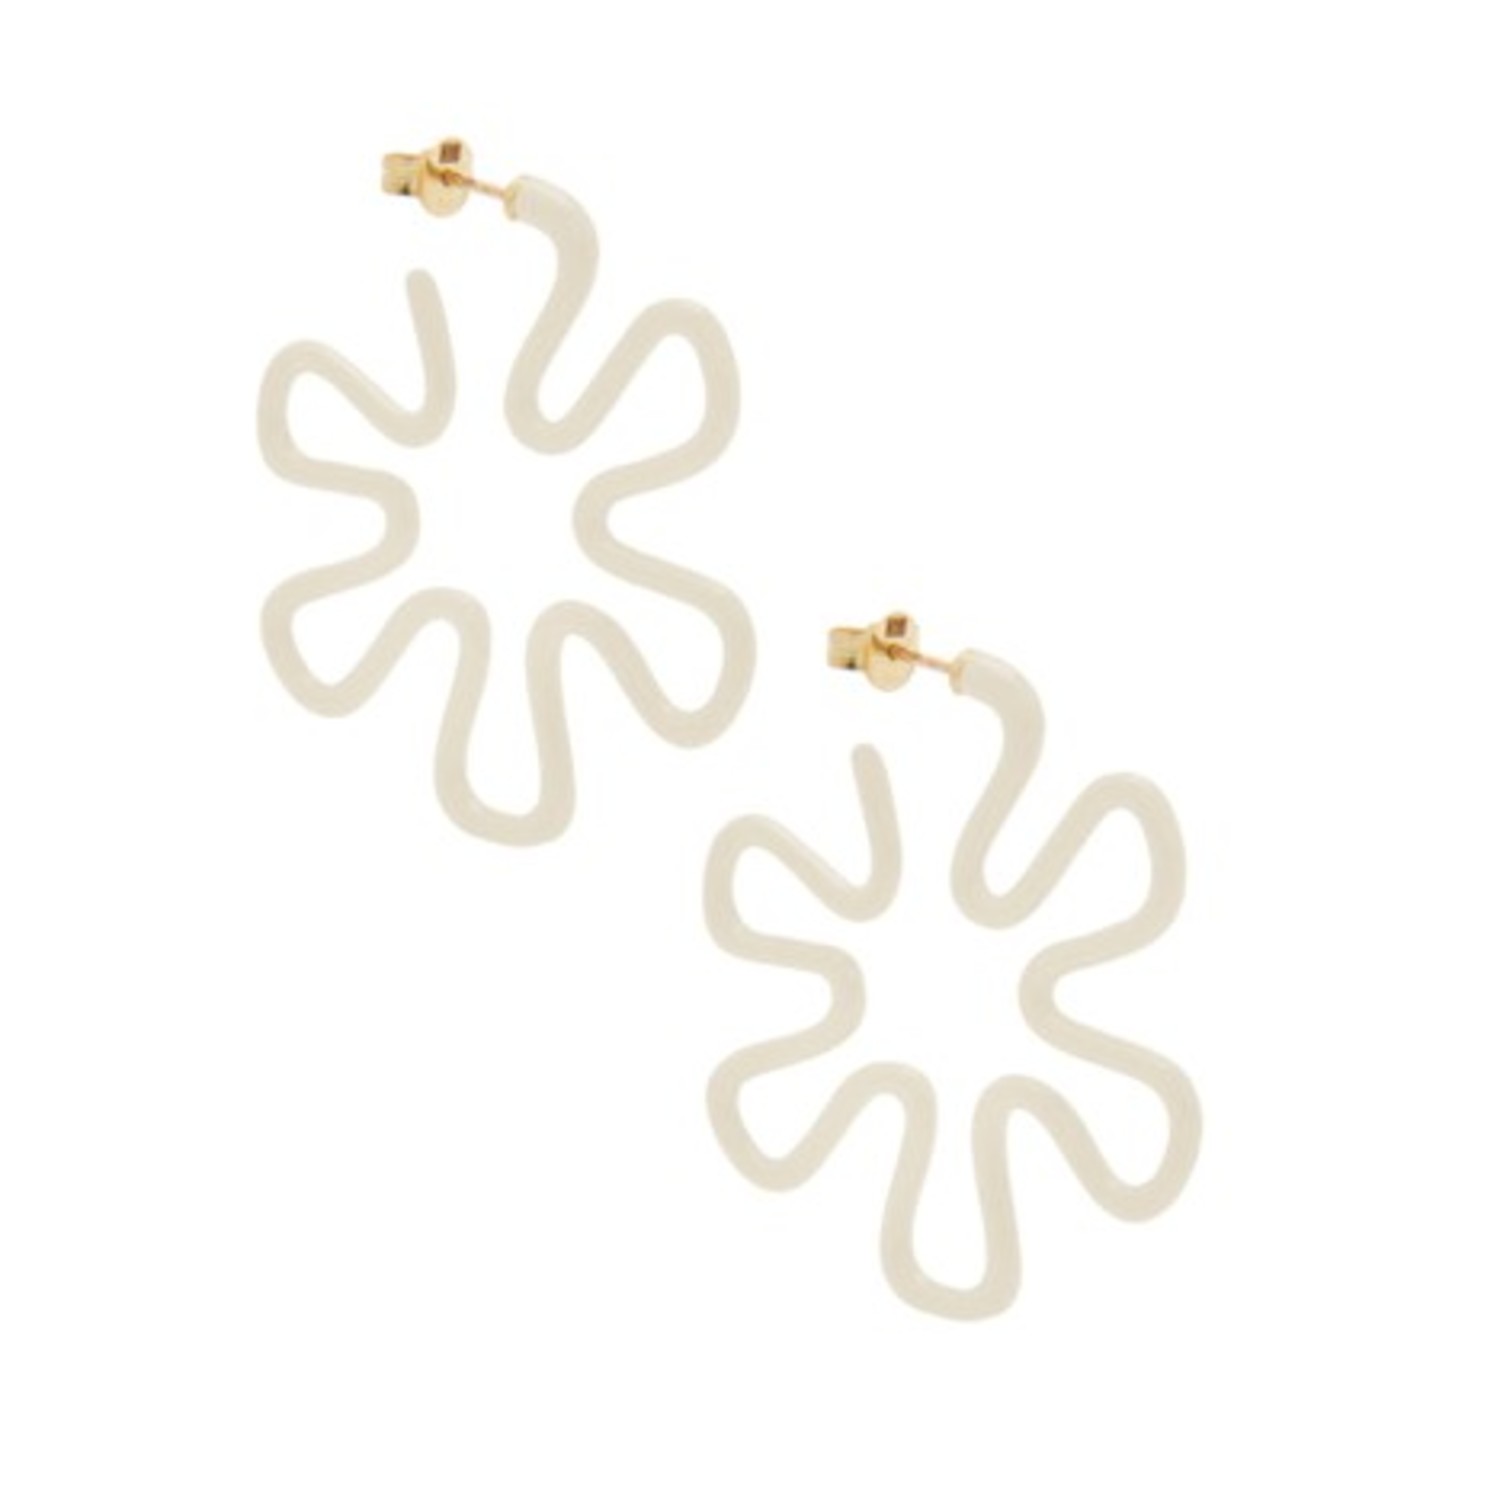 Panna B Floral Earrings in 9K Yellow Gold